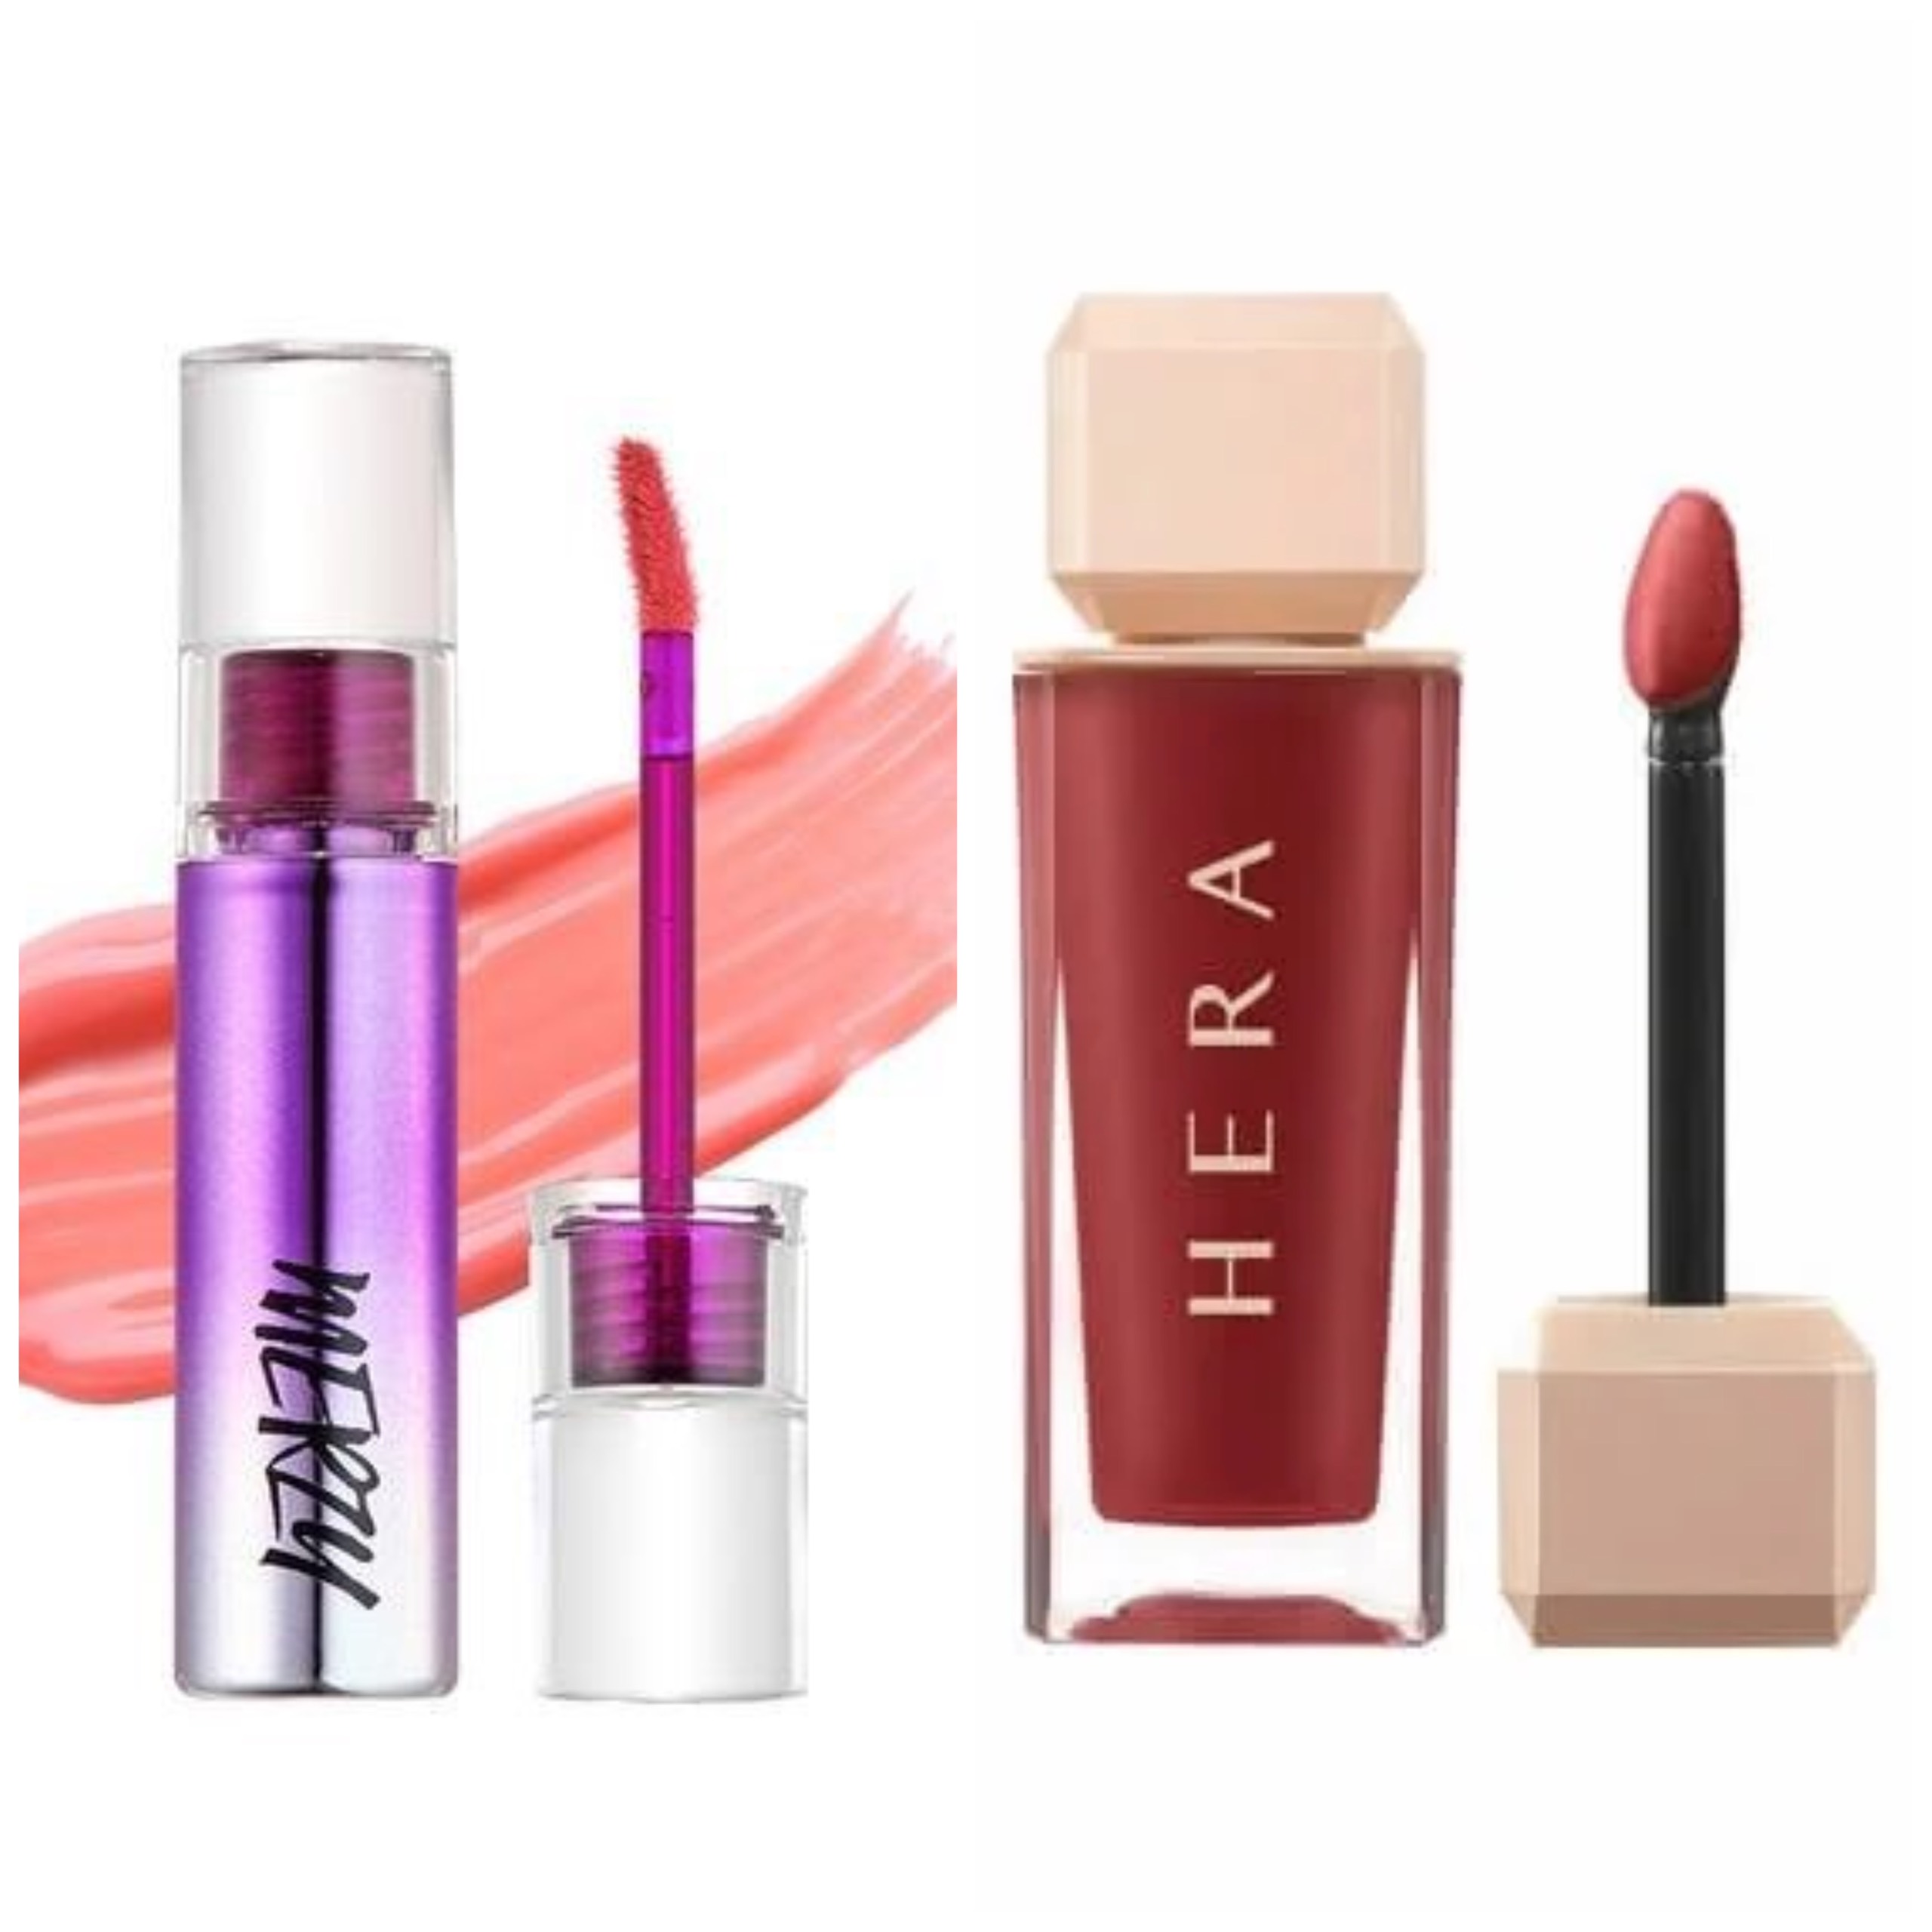 bản dupe của  son HERA Sensual Spicy Nude Gloss 422